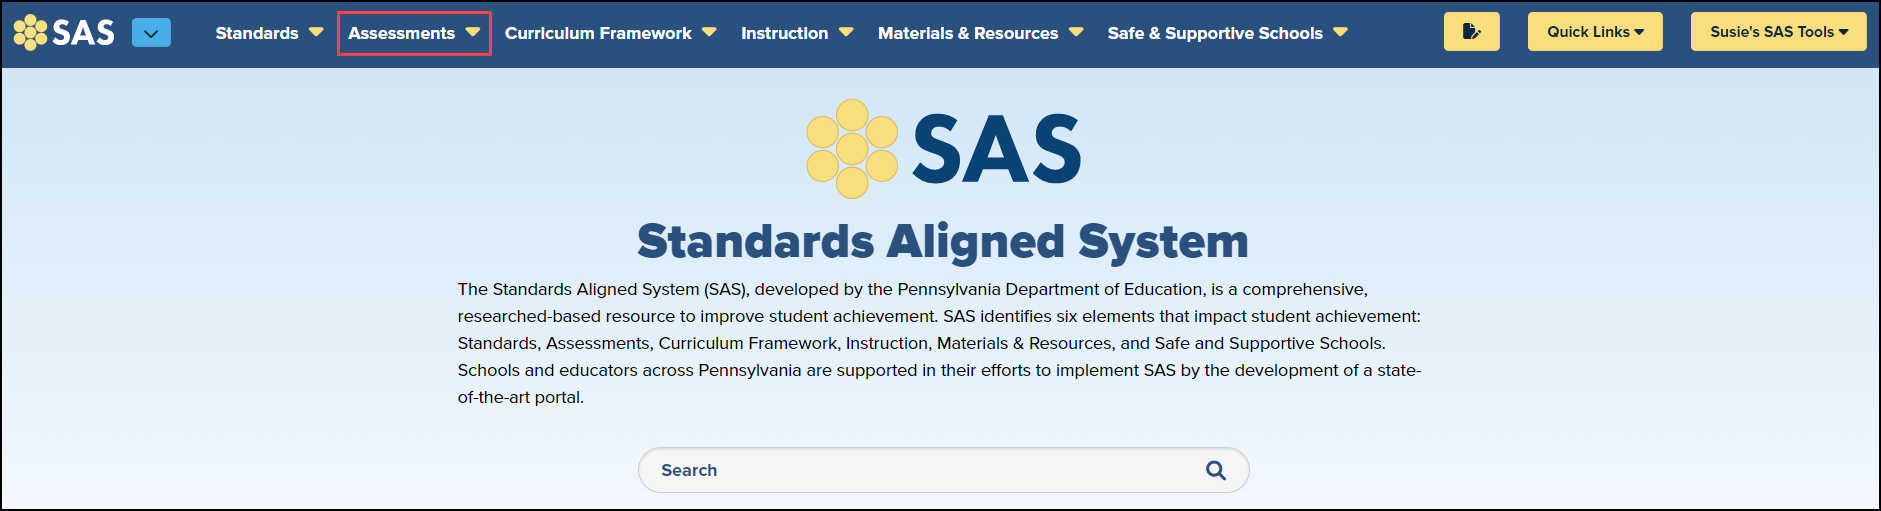 sas homepage with assessments button highlighted